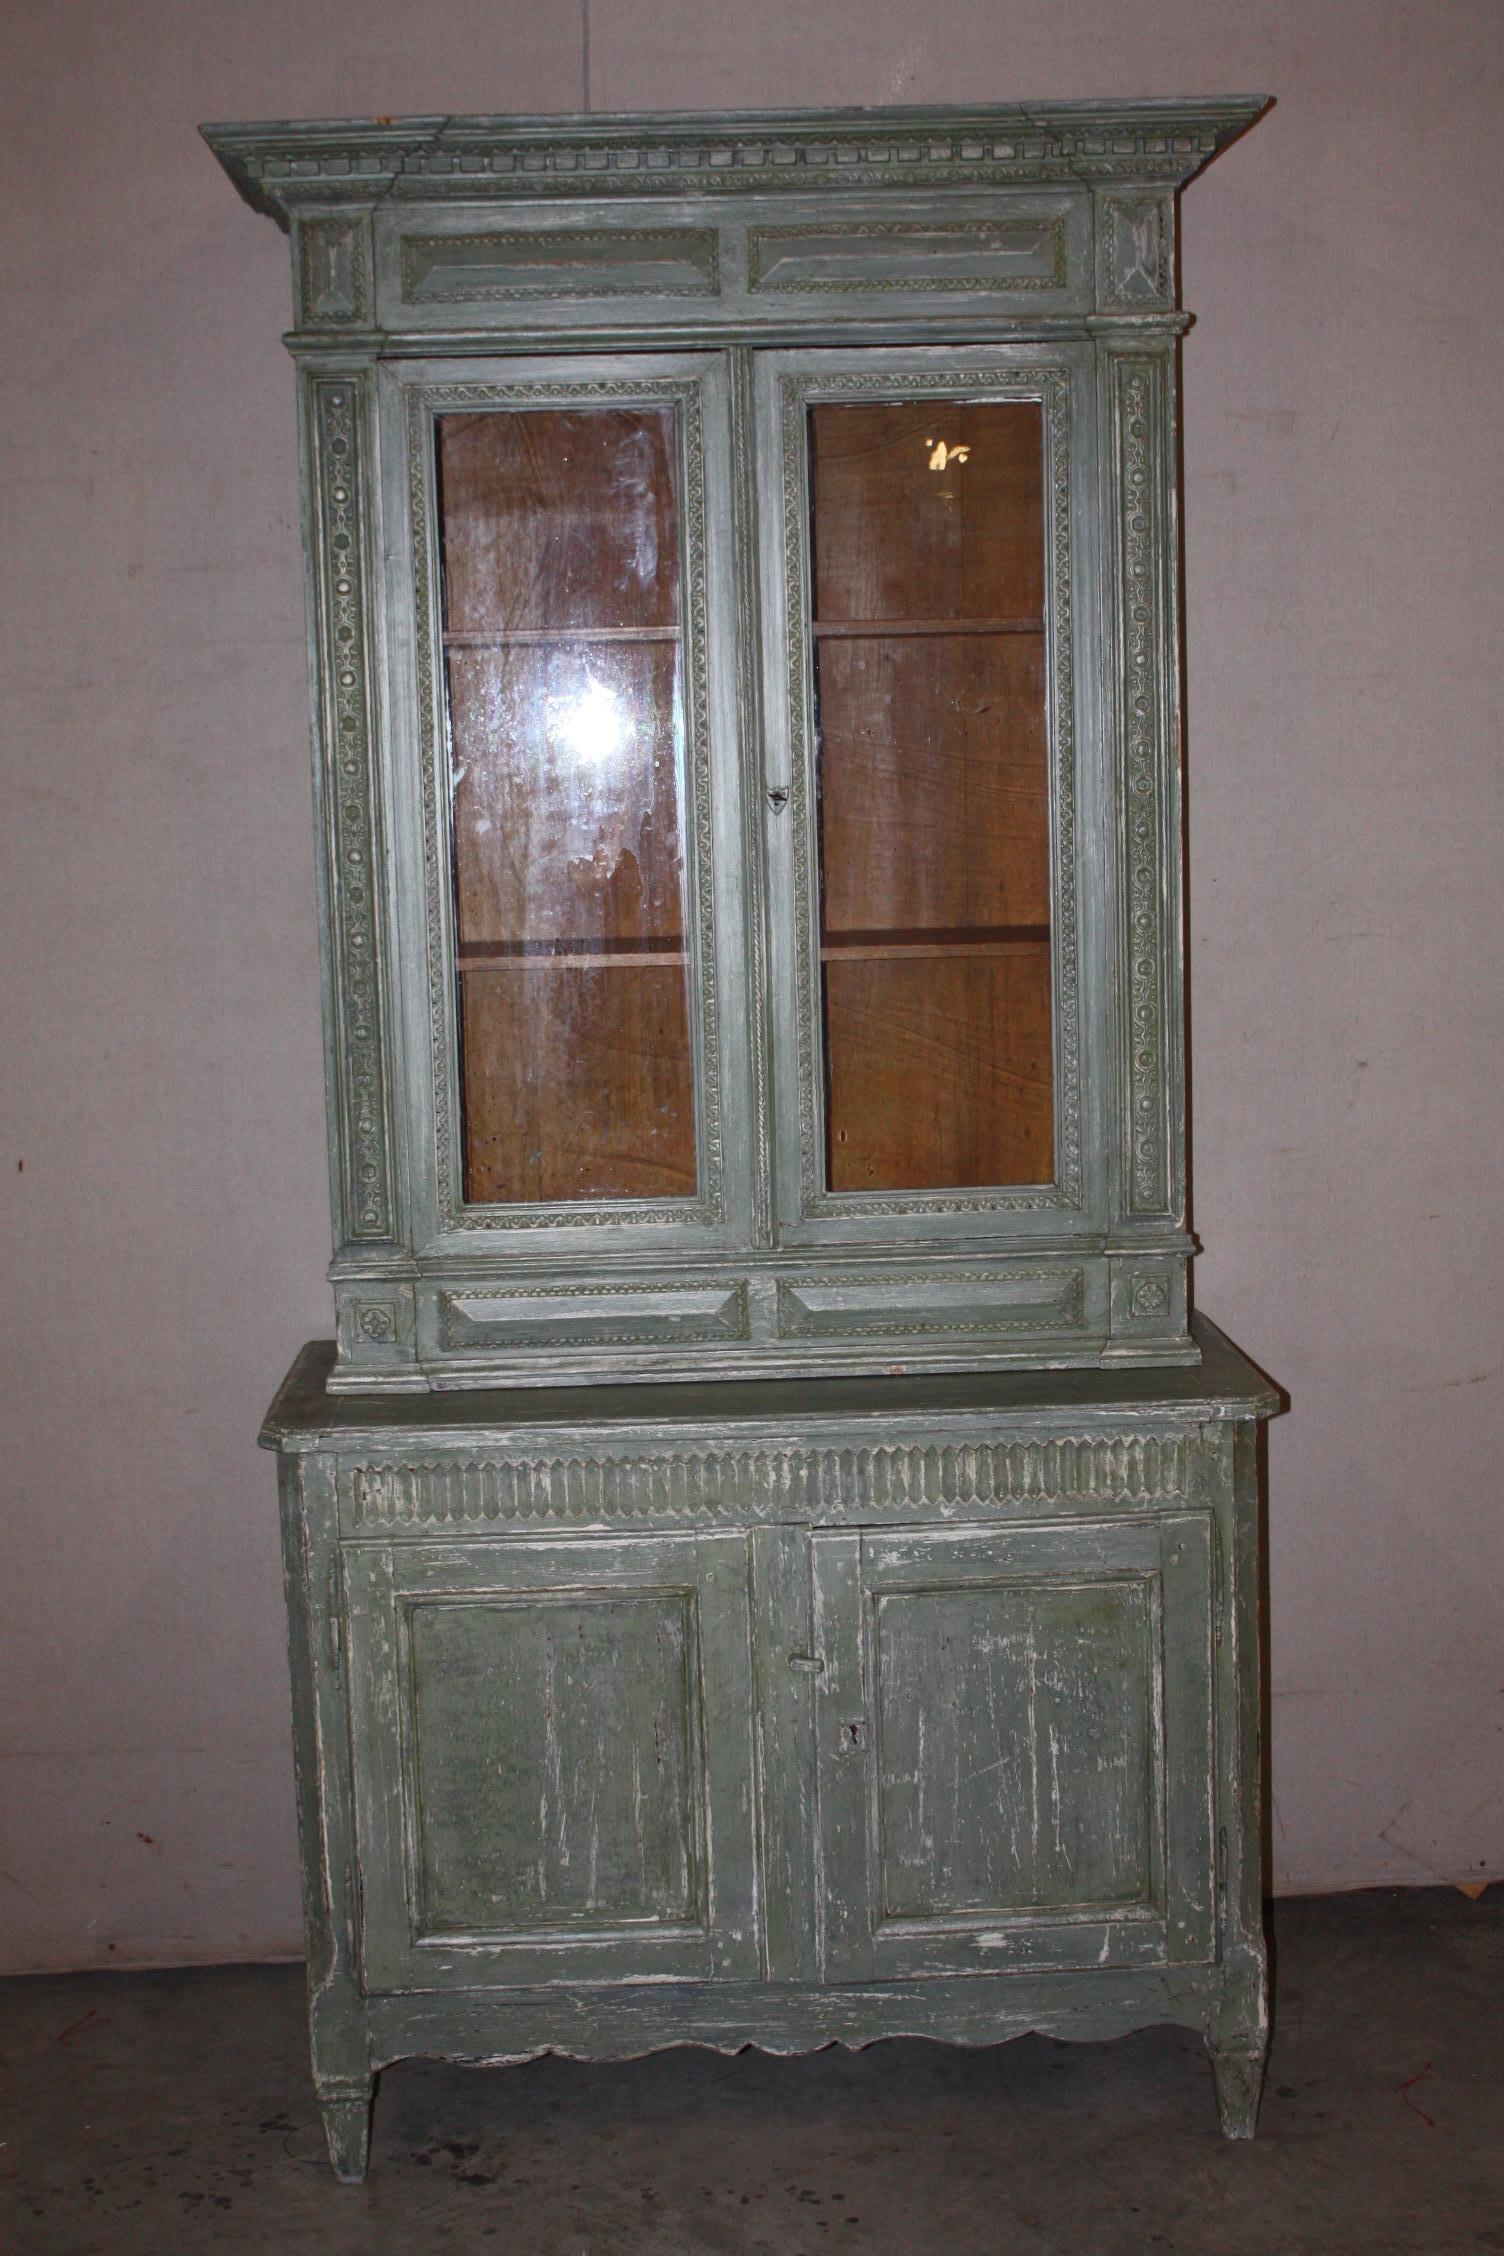 This is a really great looking petite painted buffet deux corps I purchased in France. It dates to the mid-1800s. It is in great shape. The patina of the paint is very nice. The panels of the upper doors are glass.